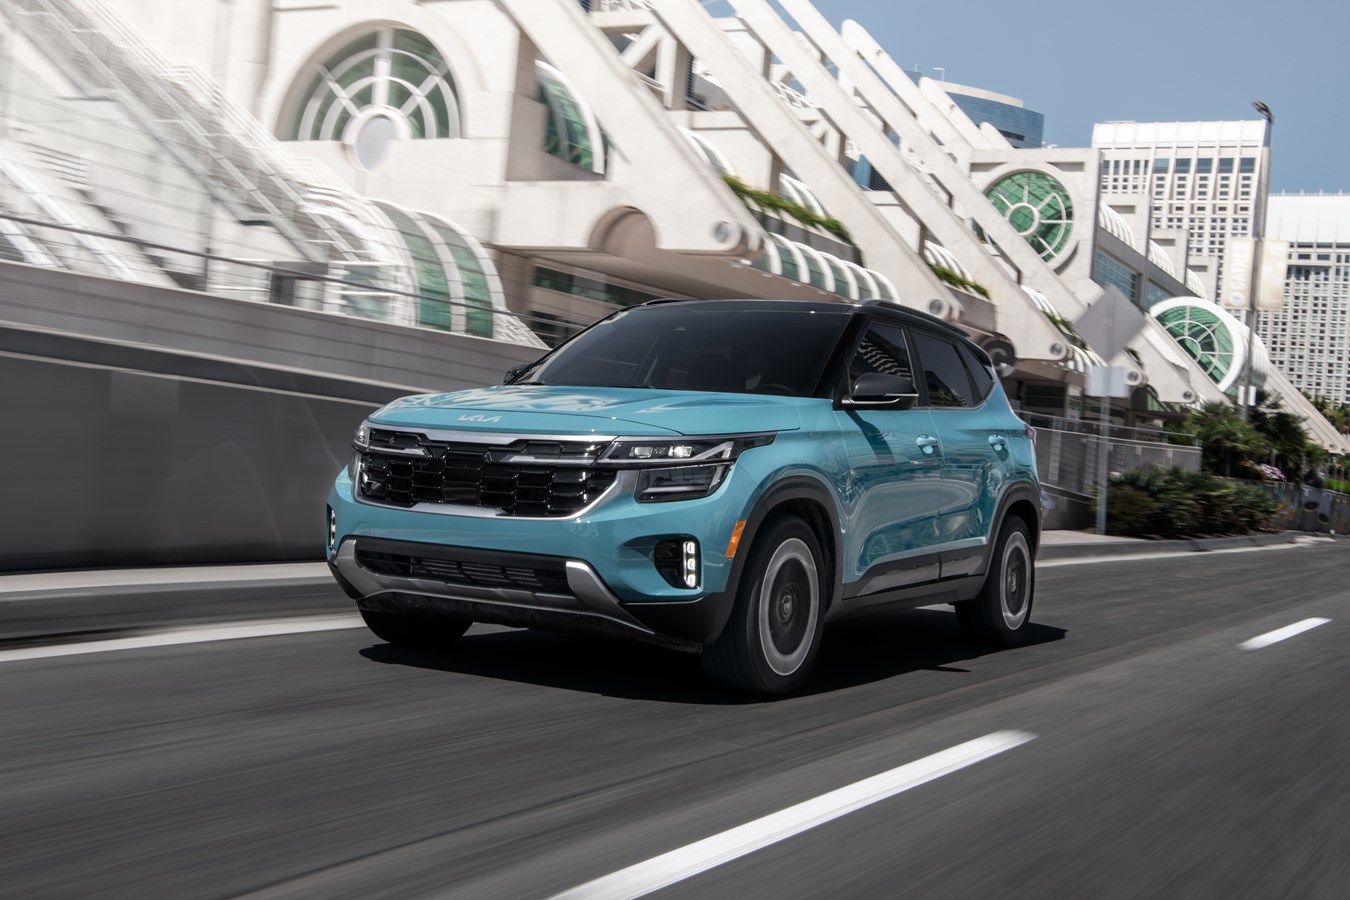 The 2024 Kia Seltos: A Refreshed Design and Bolder Performance for the Ultimate Entry SUV